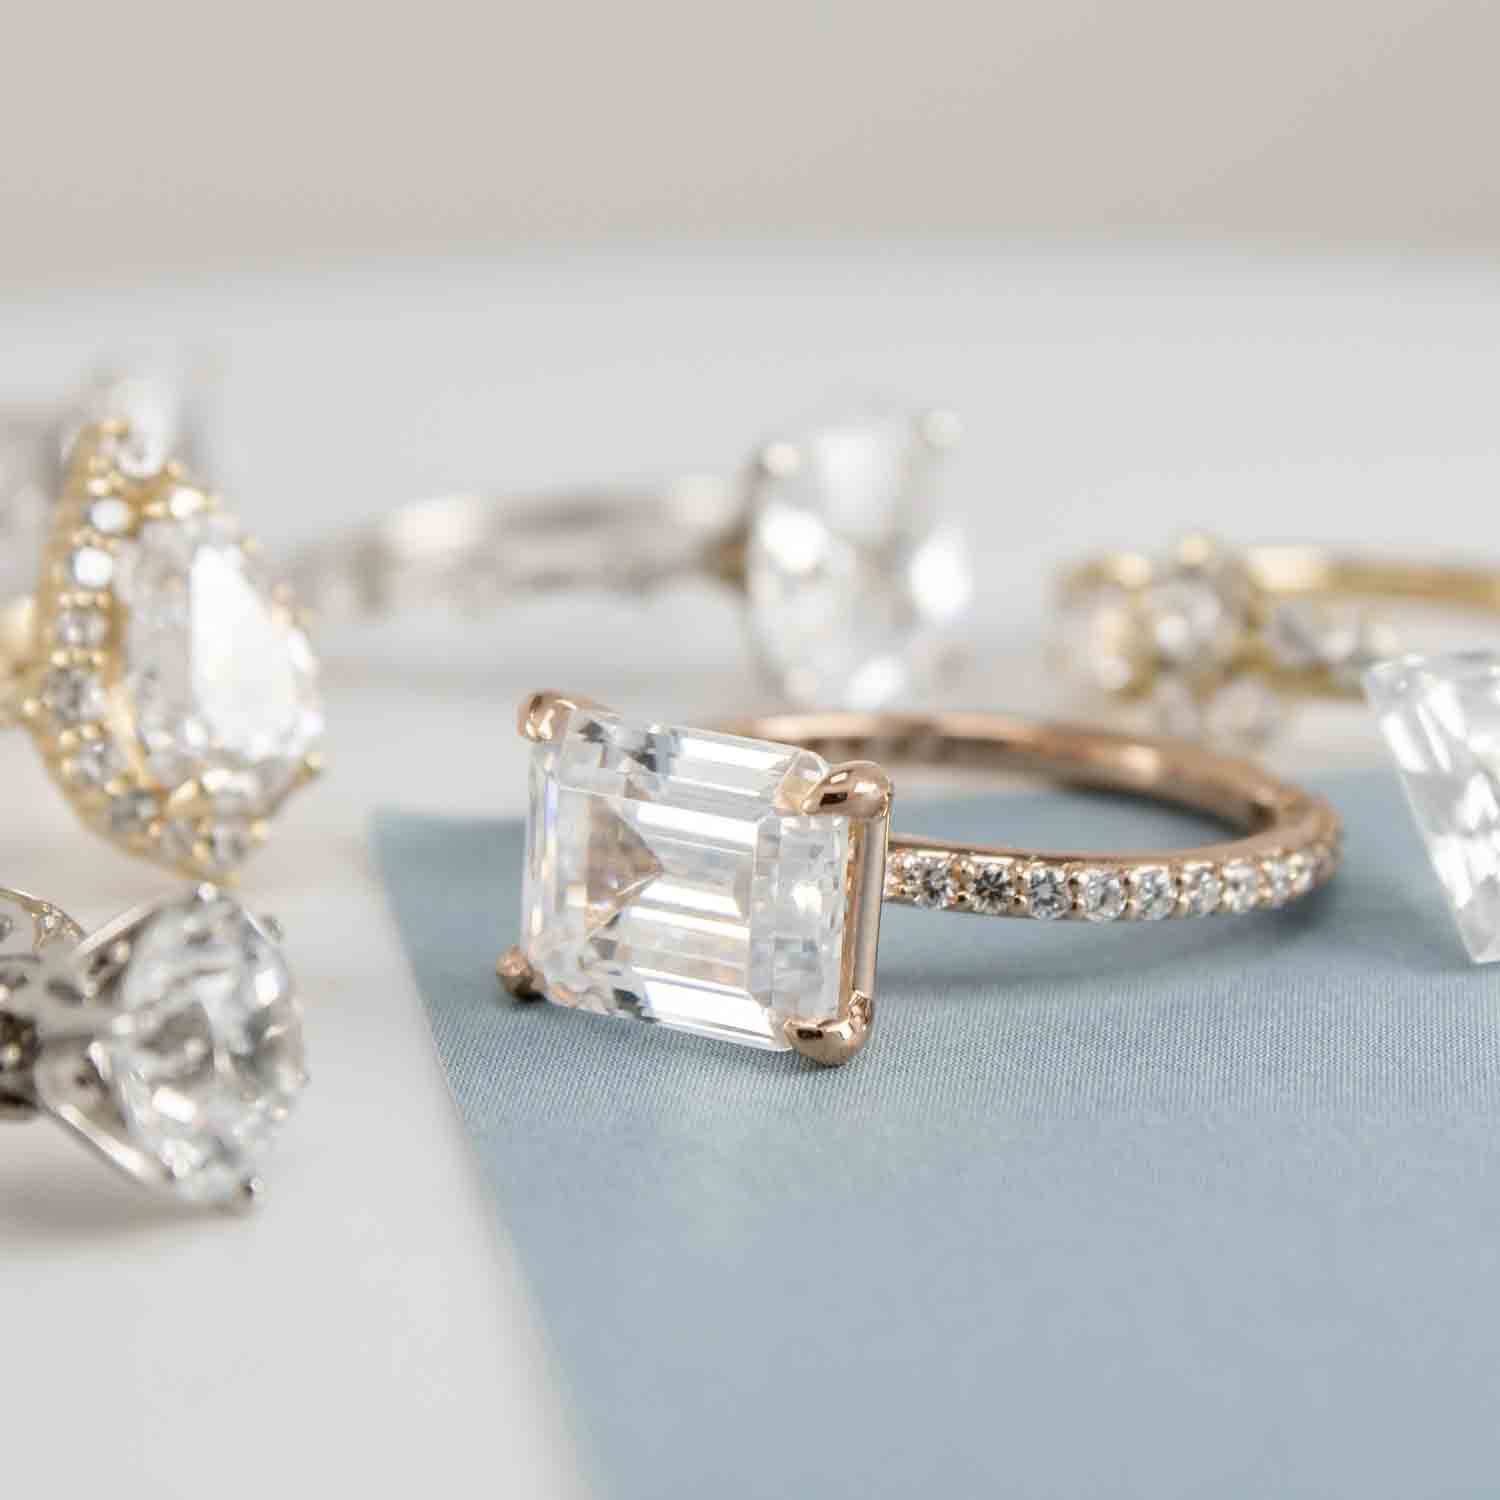 Engagement Rings Different Styles and Diamond Shapes | Lisa Robin